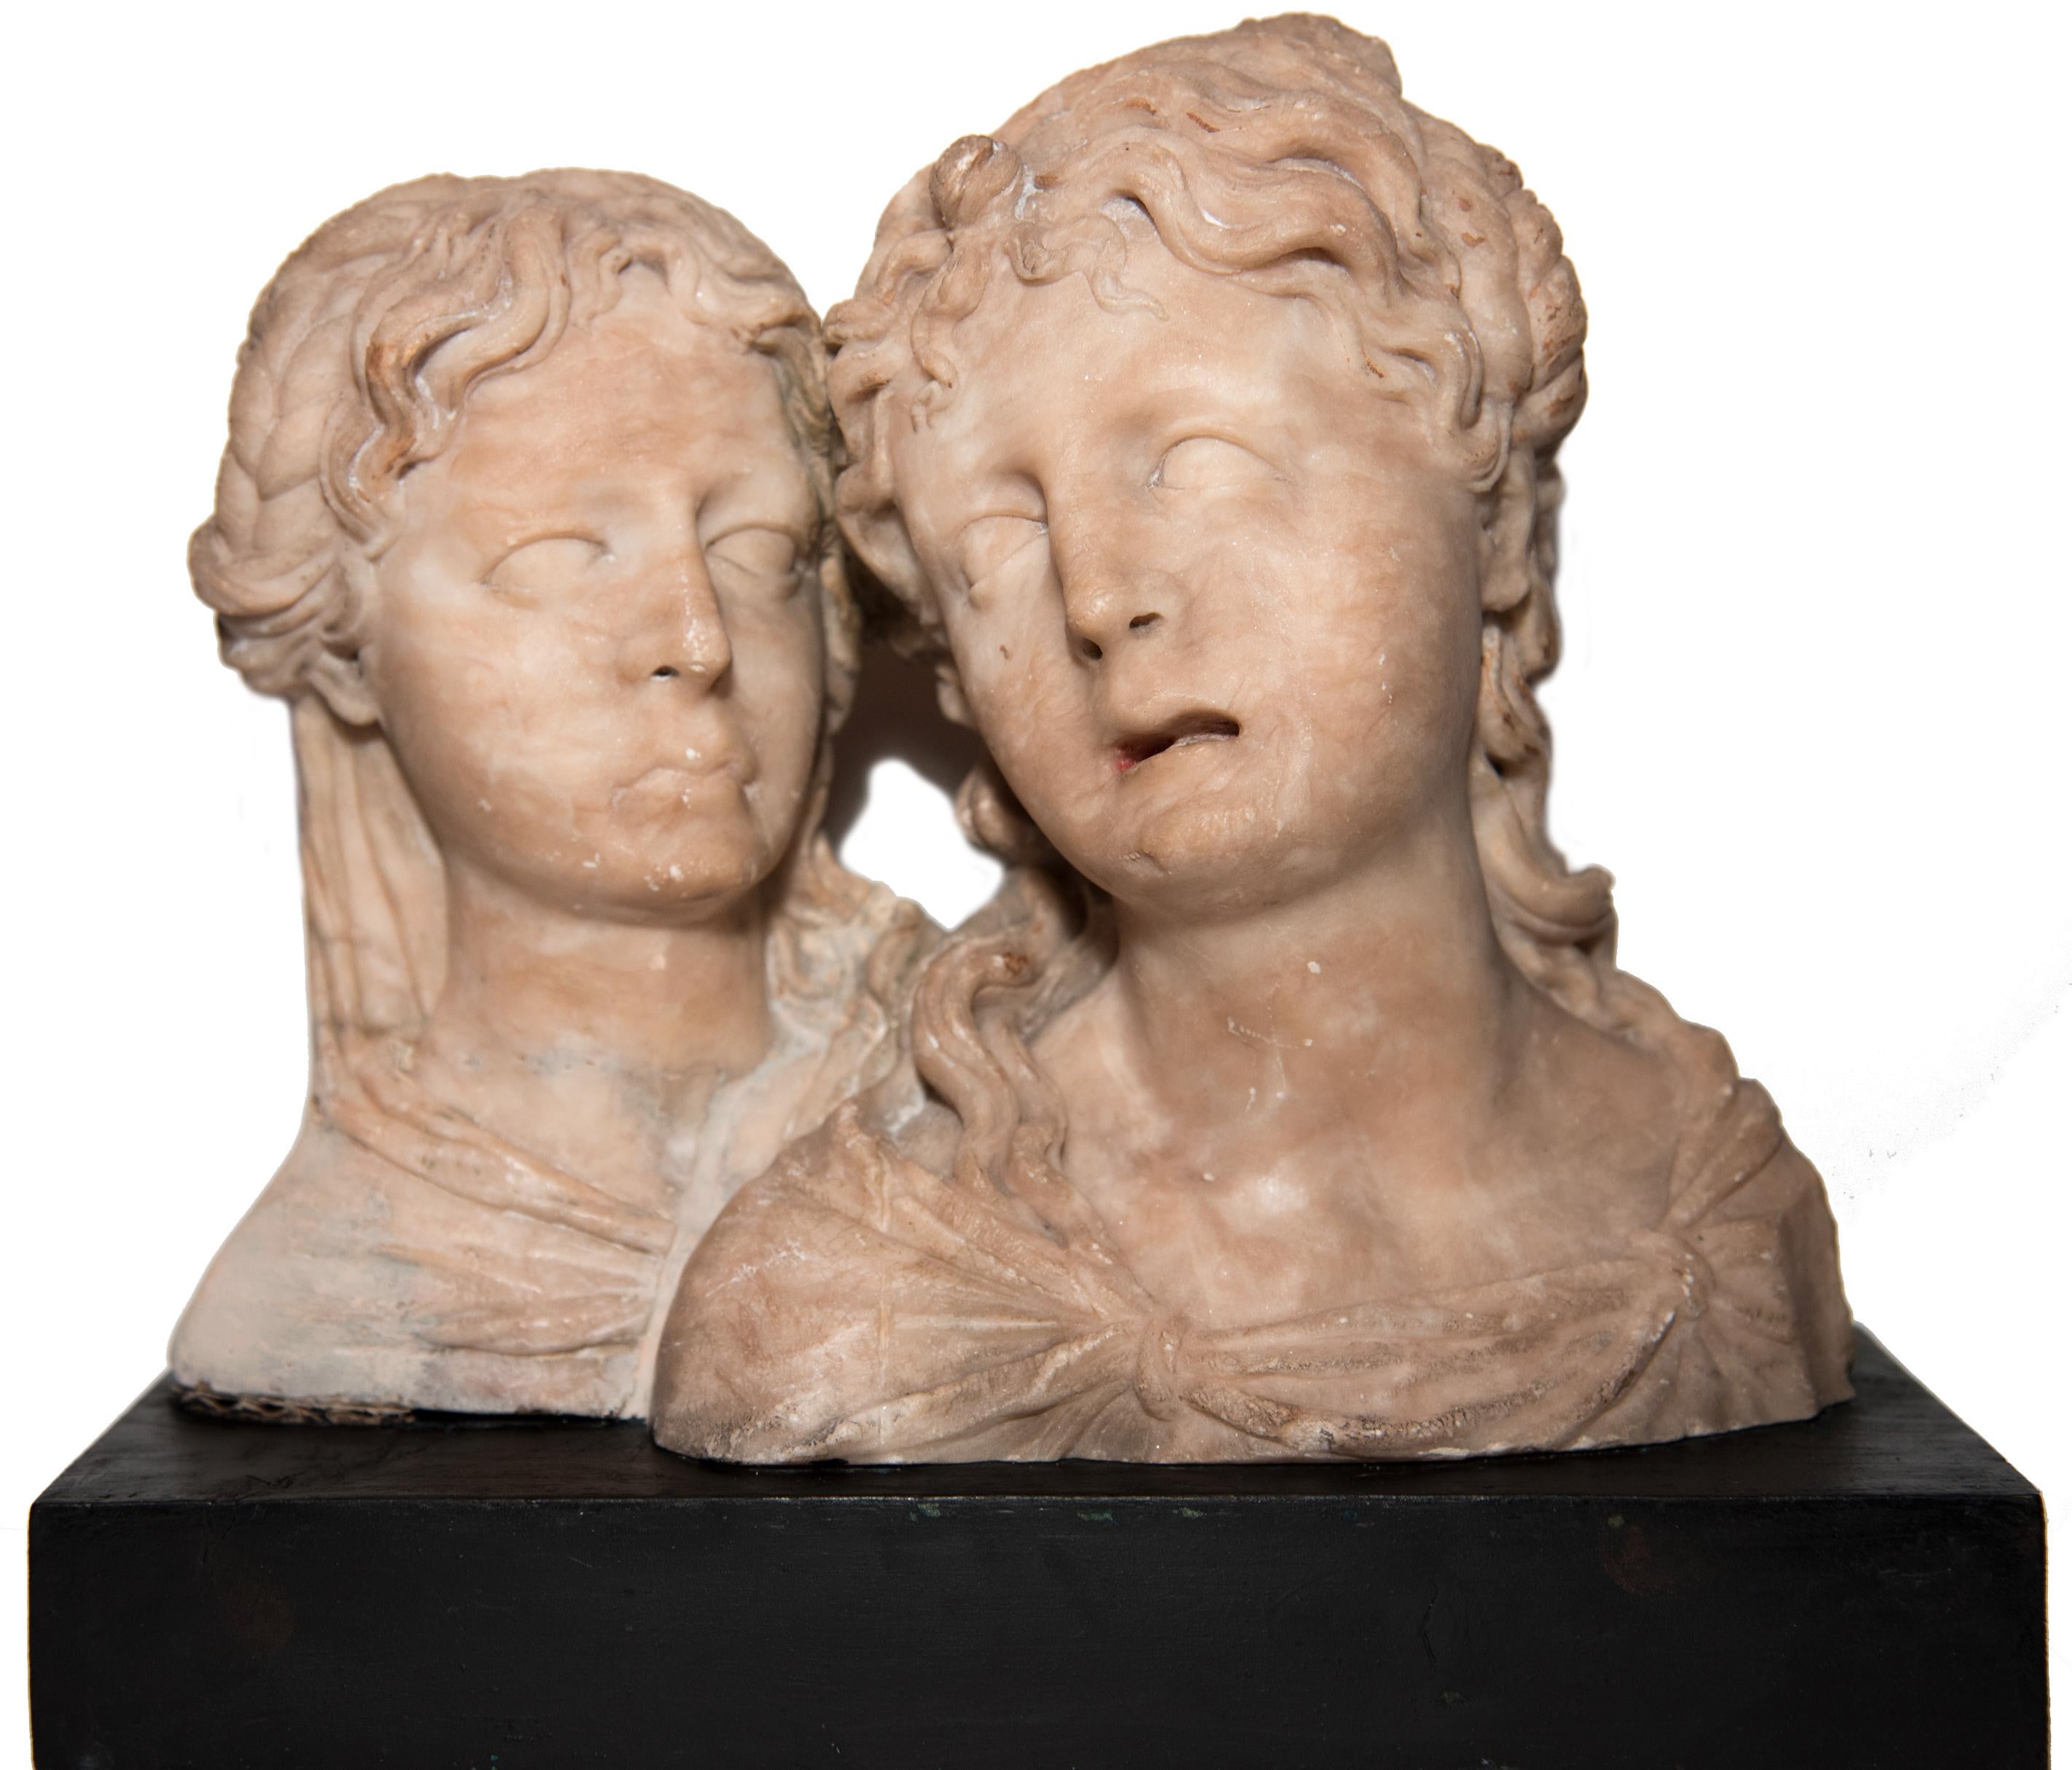 Unknown Figurative Sculpture - Pair of Female Busts In Alabaster, Southern Netherlands Circa 1550